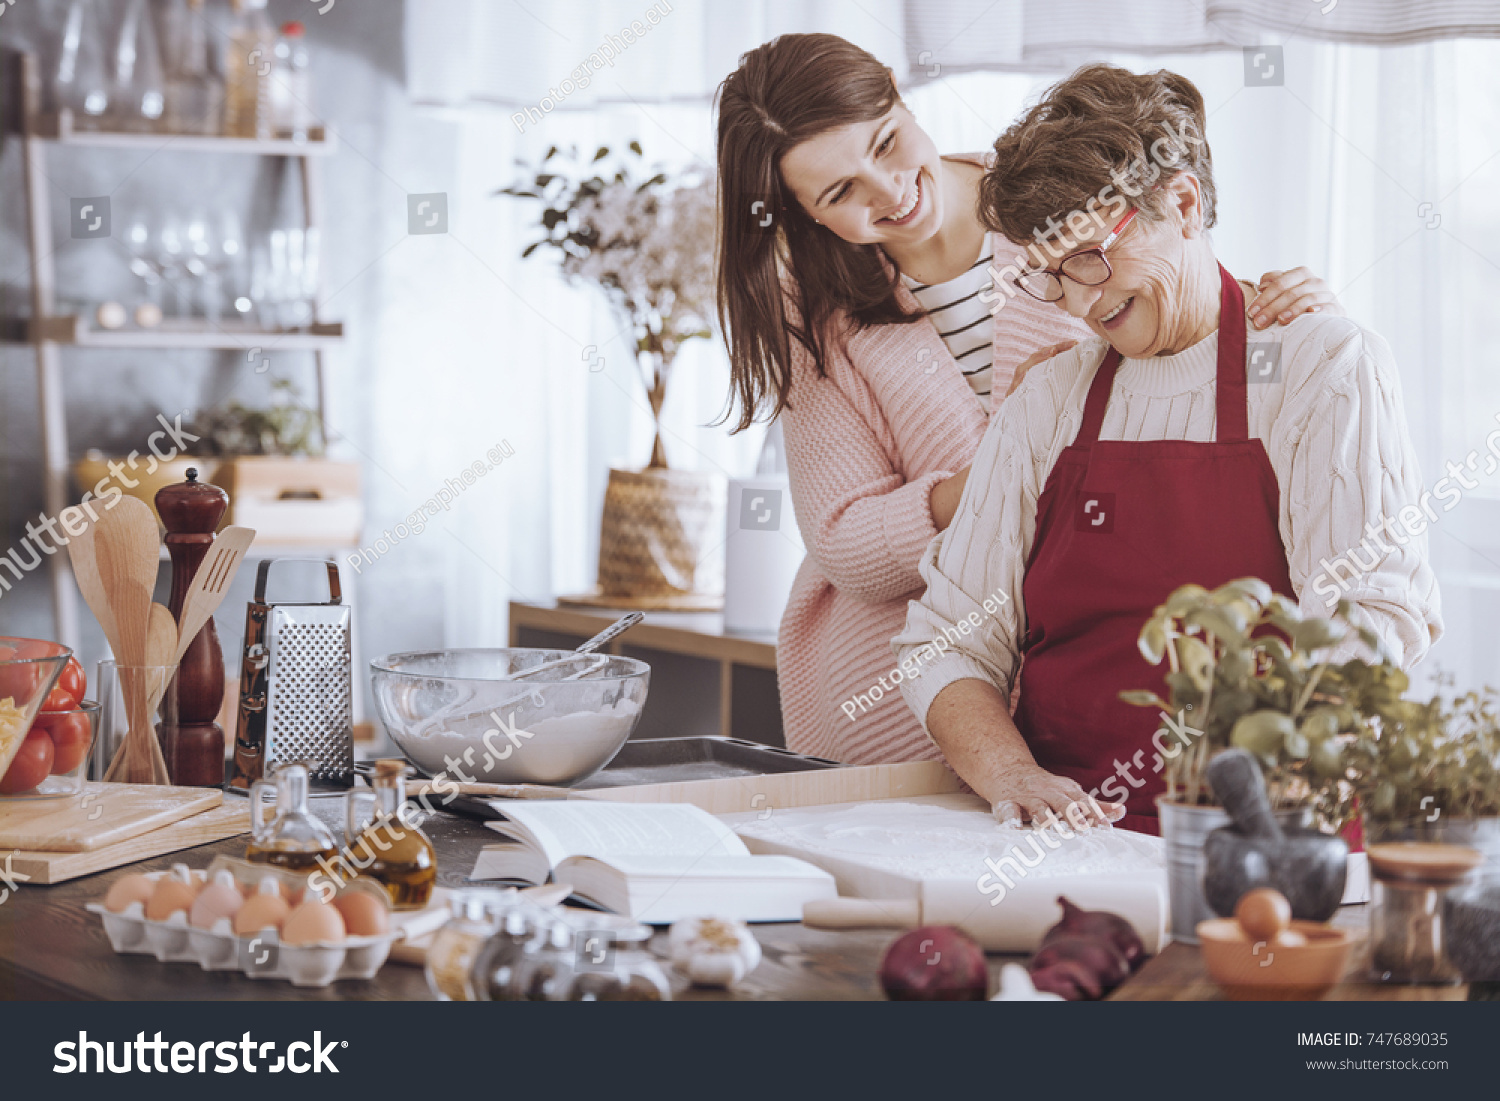 Smiling woman massaging grandmother's shoulder while making cake in the kitchen #747689035